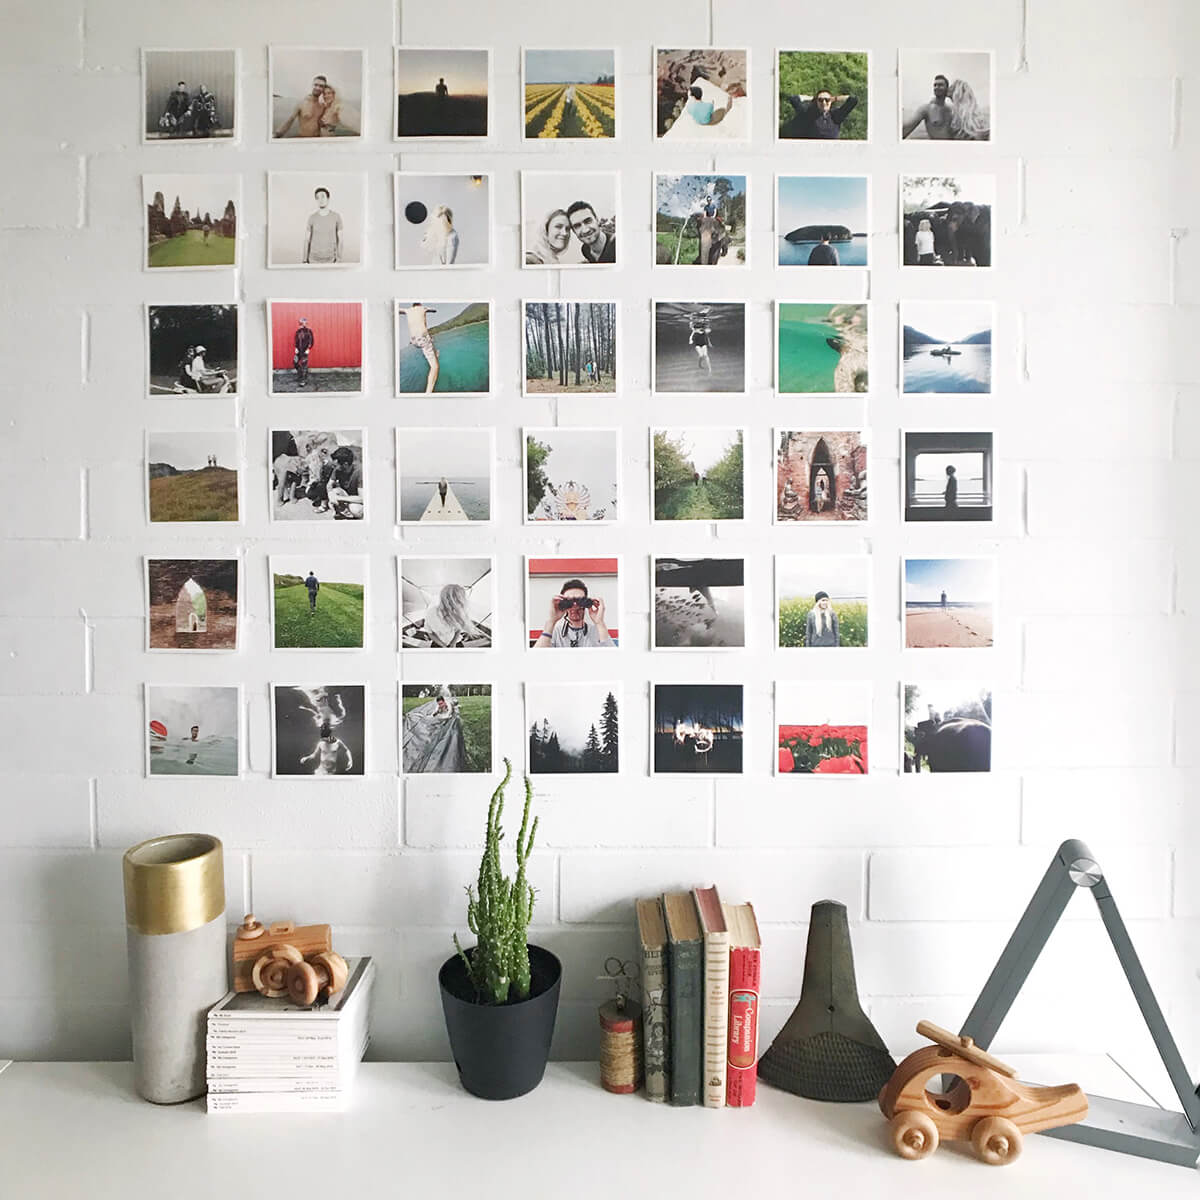 Square grid arrangement of photo prints on wall